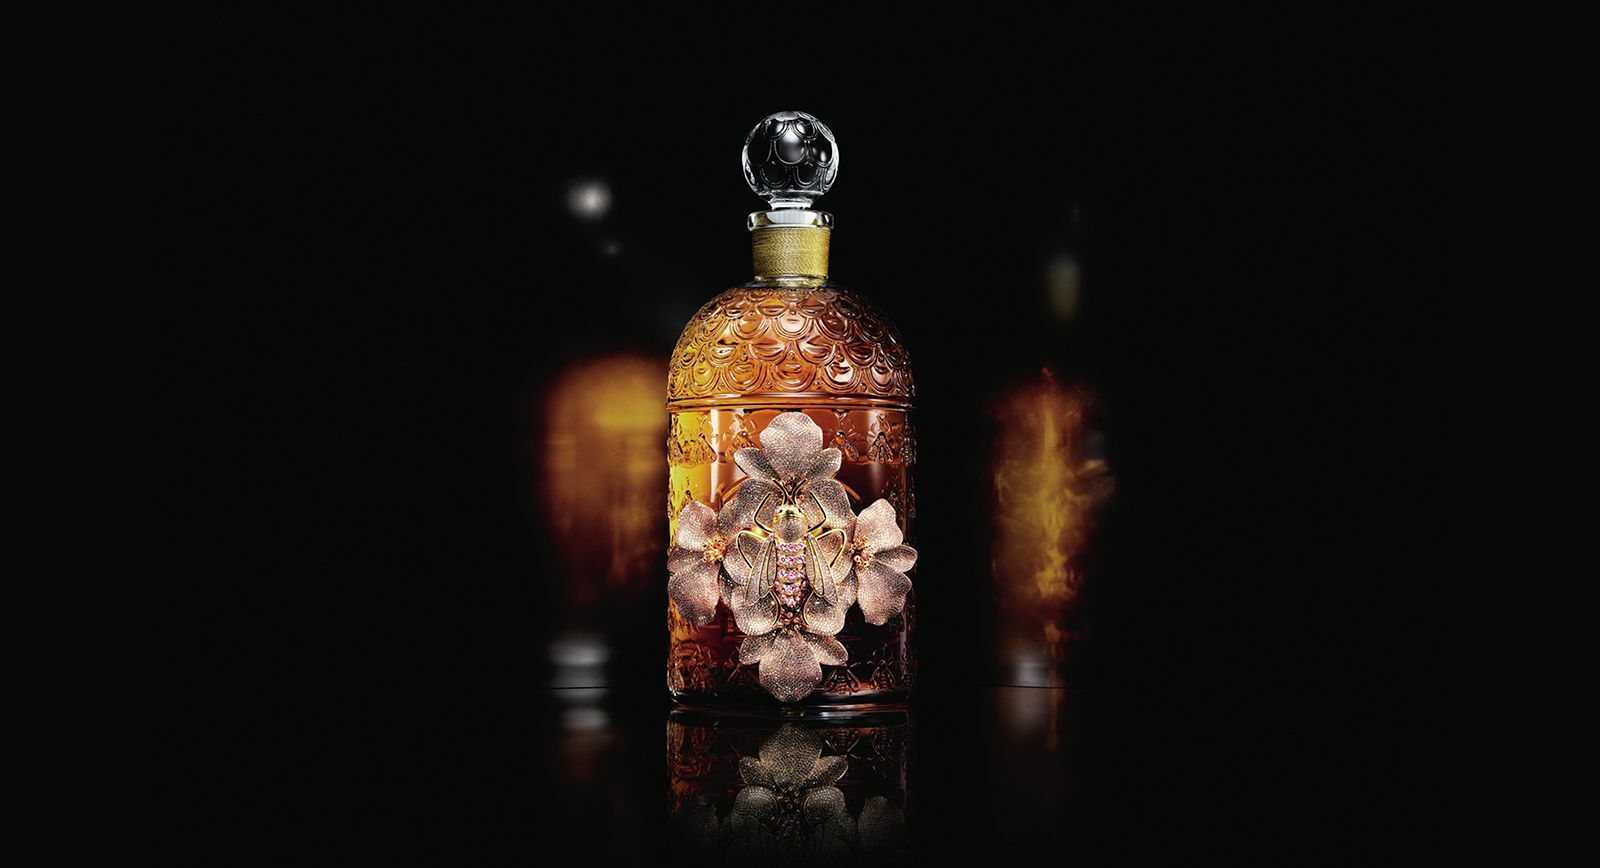 The Bee Bottle by Begüm Khan for Guerlain perfume in gold-plated bronze with pavé gemstones